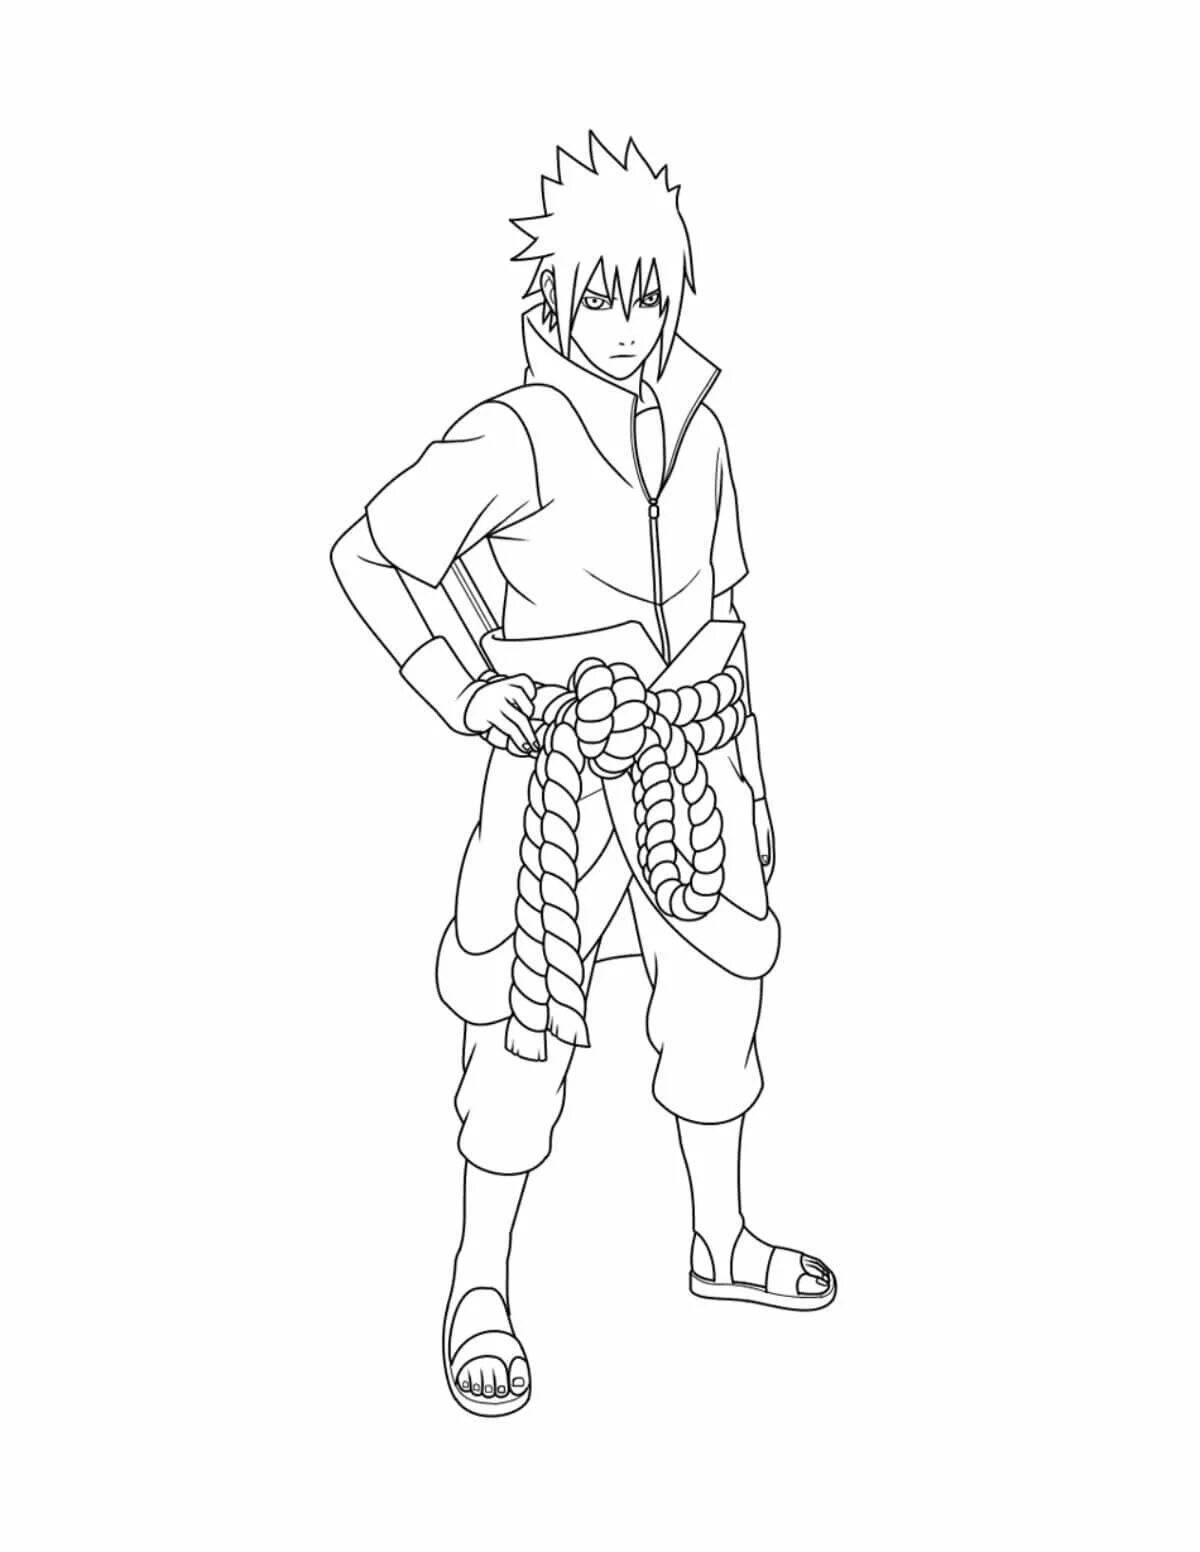 Shisui uchiha brightly colored coloring page